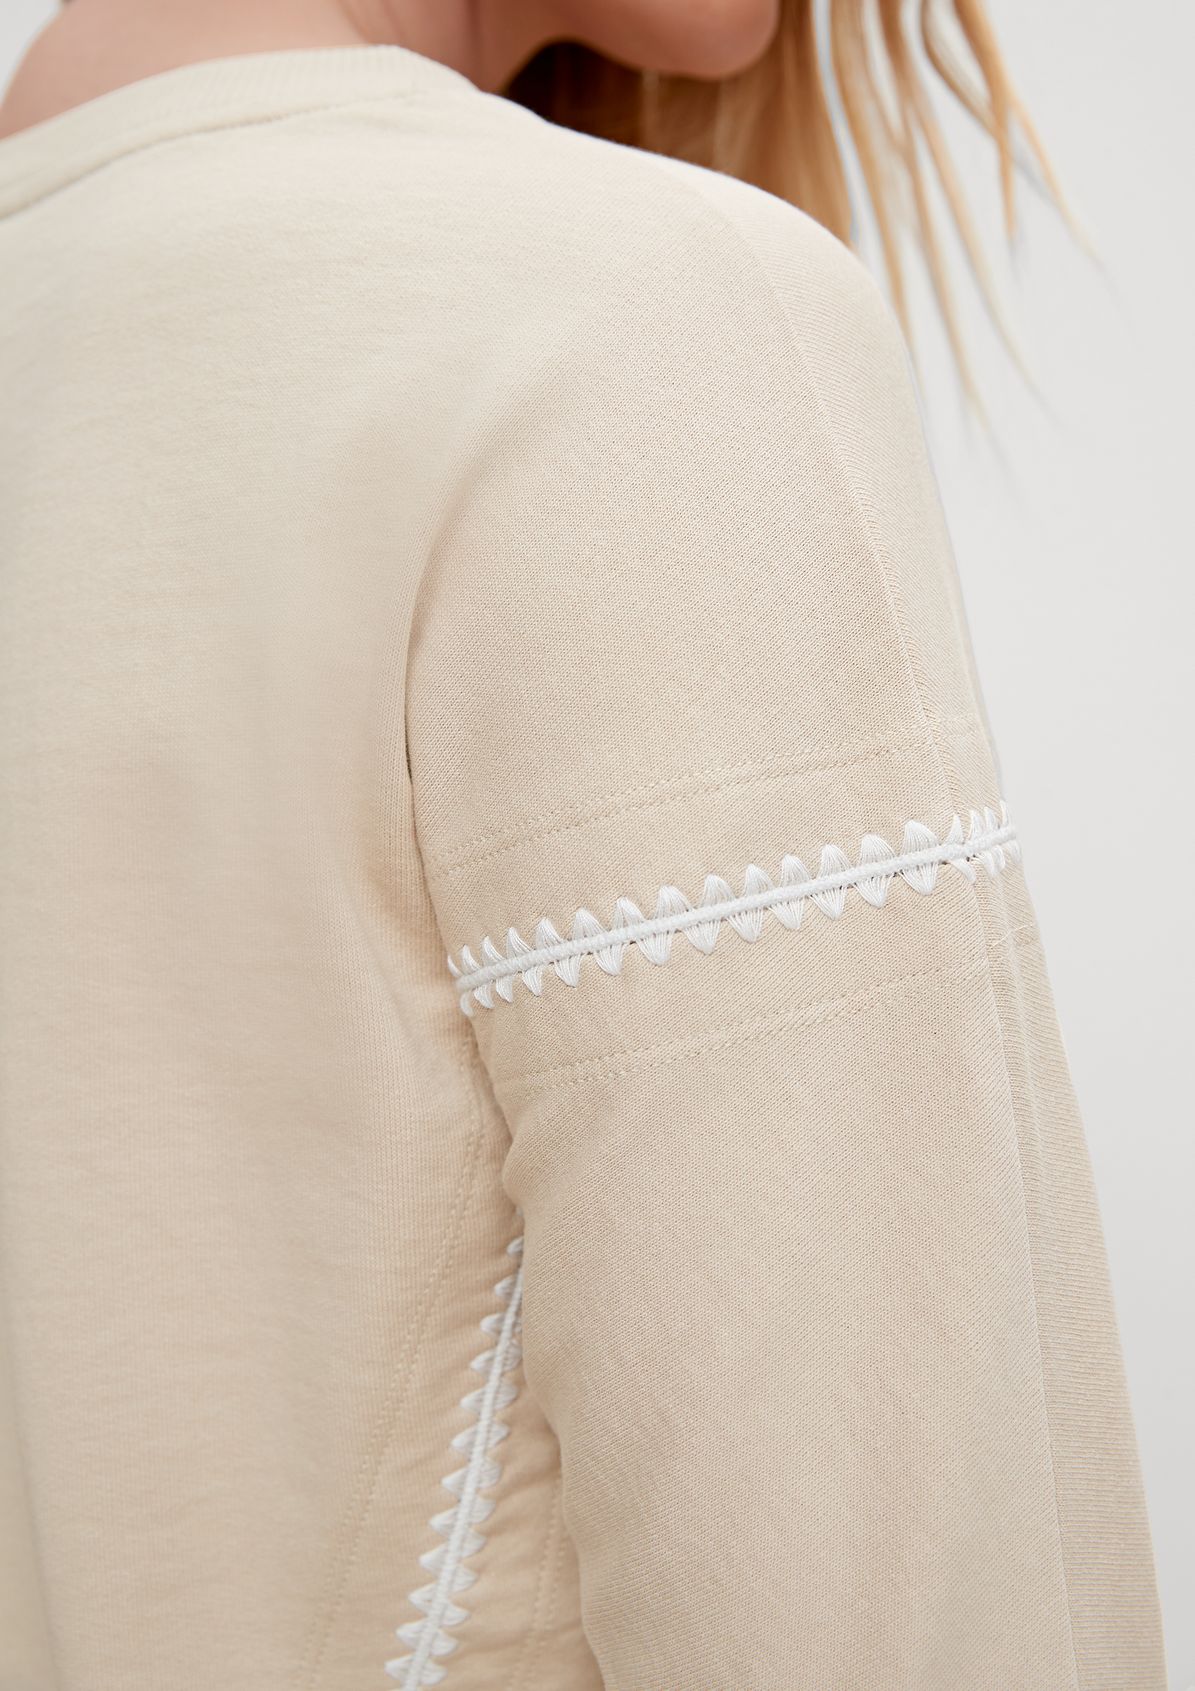 Jumper with embroidered details from comma